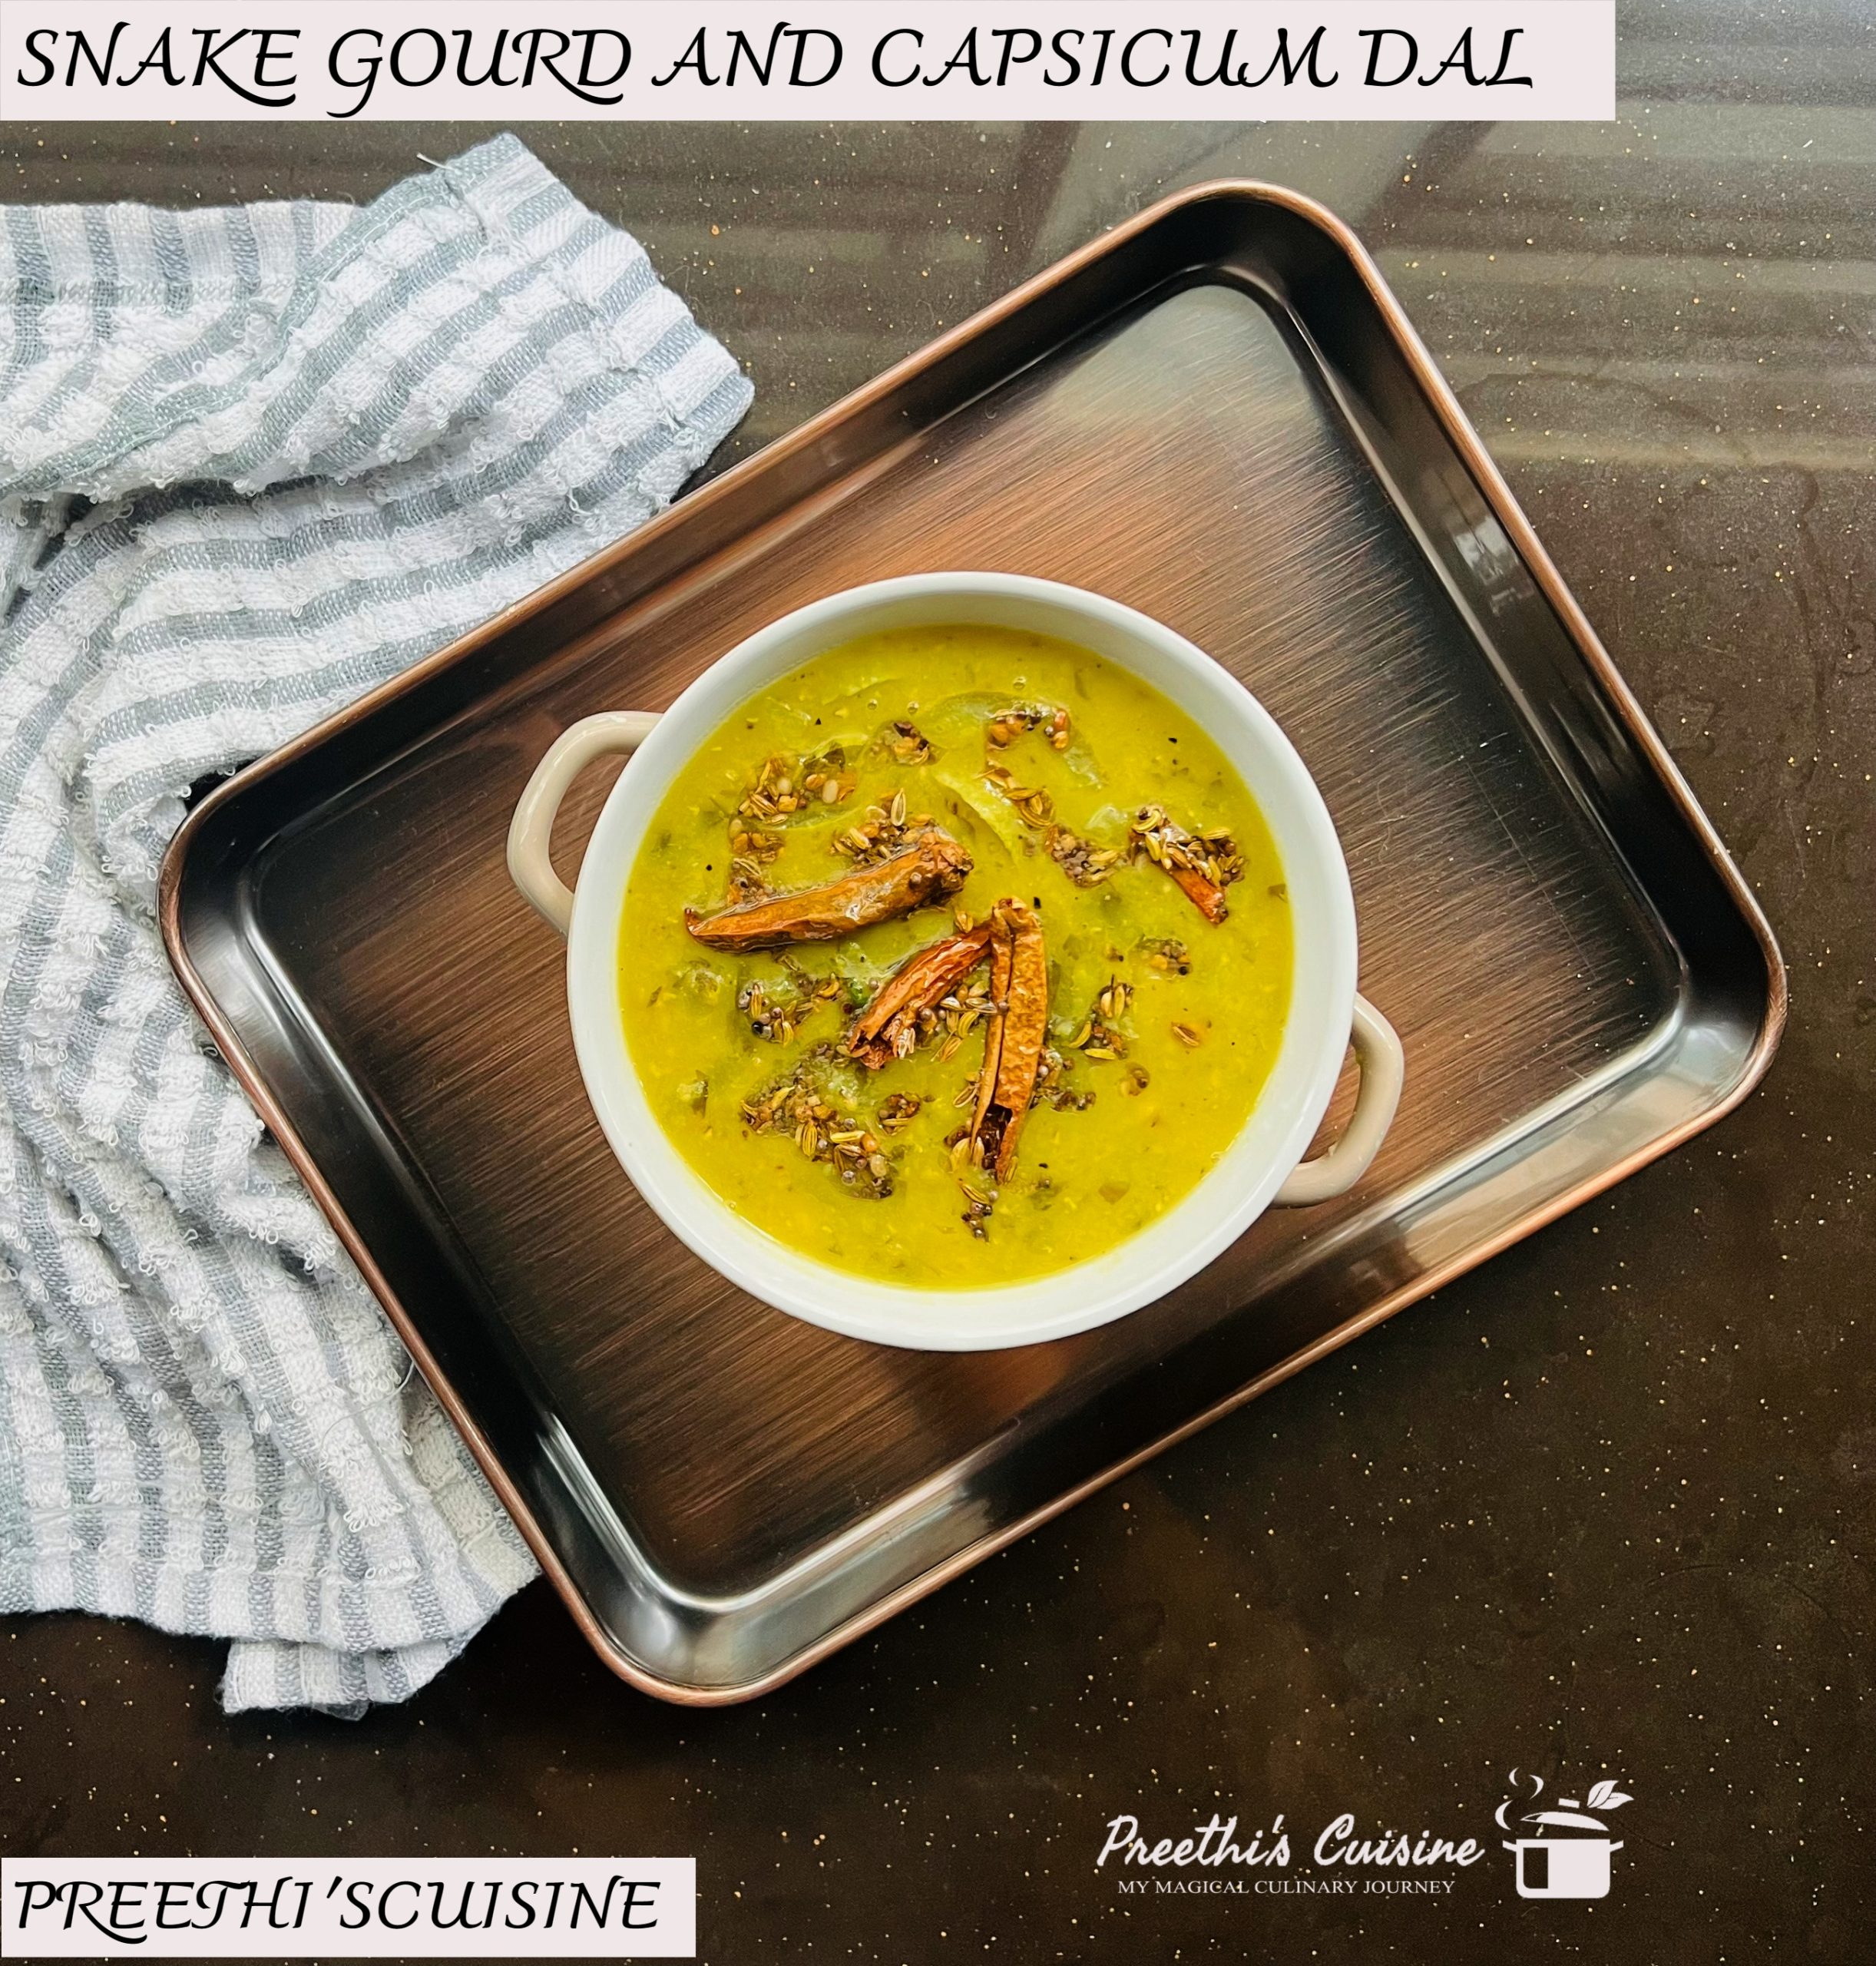 SNAKE GOURD AND CAPSICUM DAL